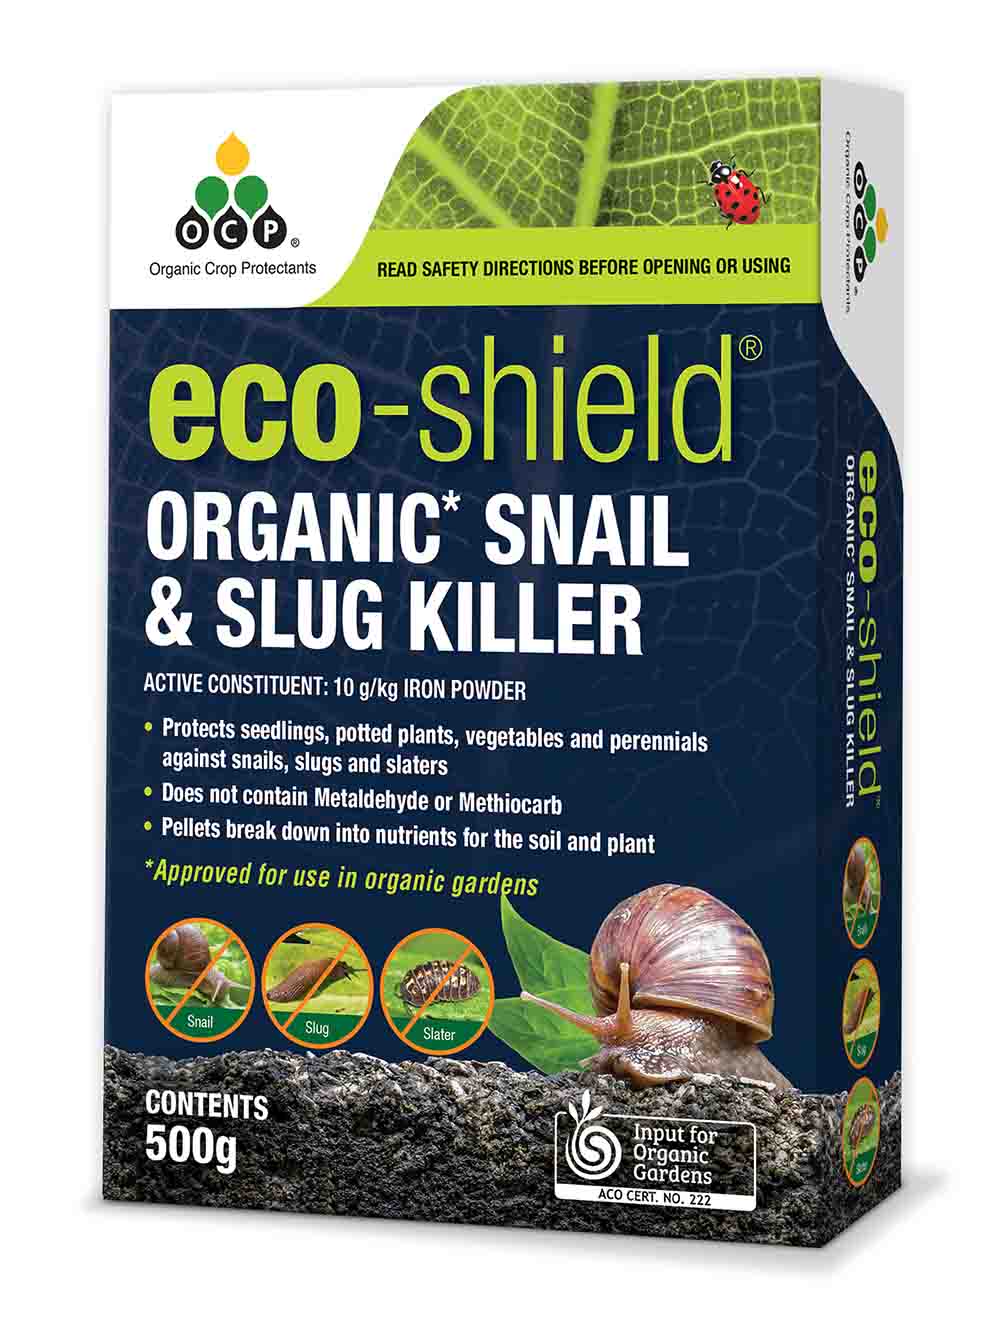 Use OCP eco-shield to protect seedlings and other plants against slater damage